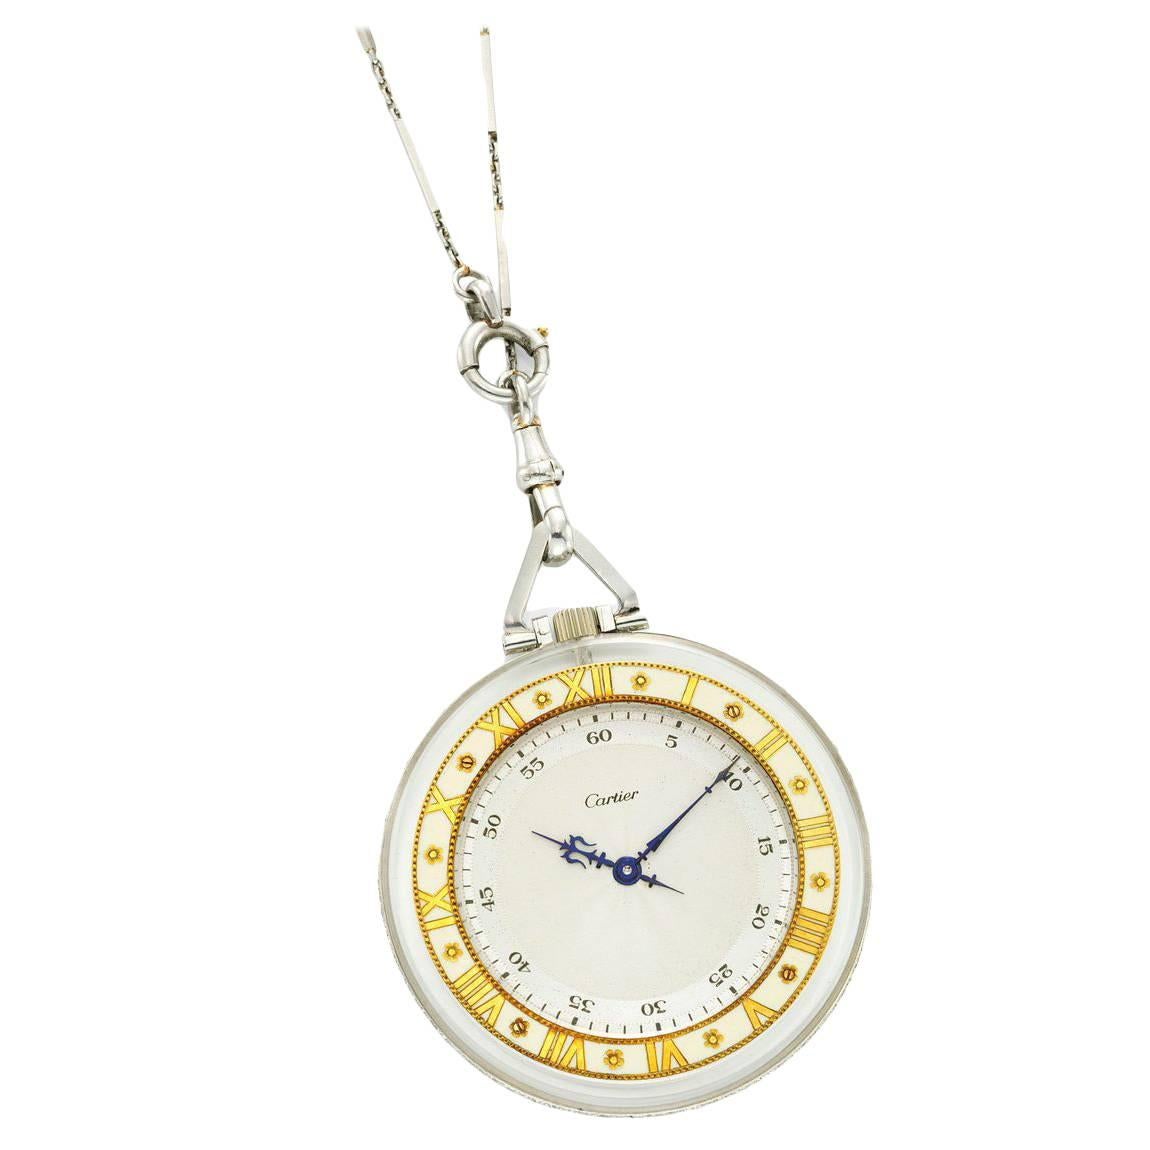 Cartier, A Rock Crystal, Diamond and Enamel Pocket Watch For Sale